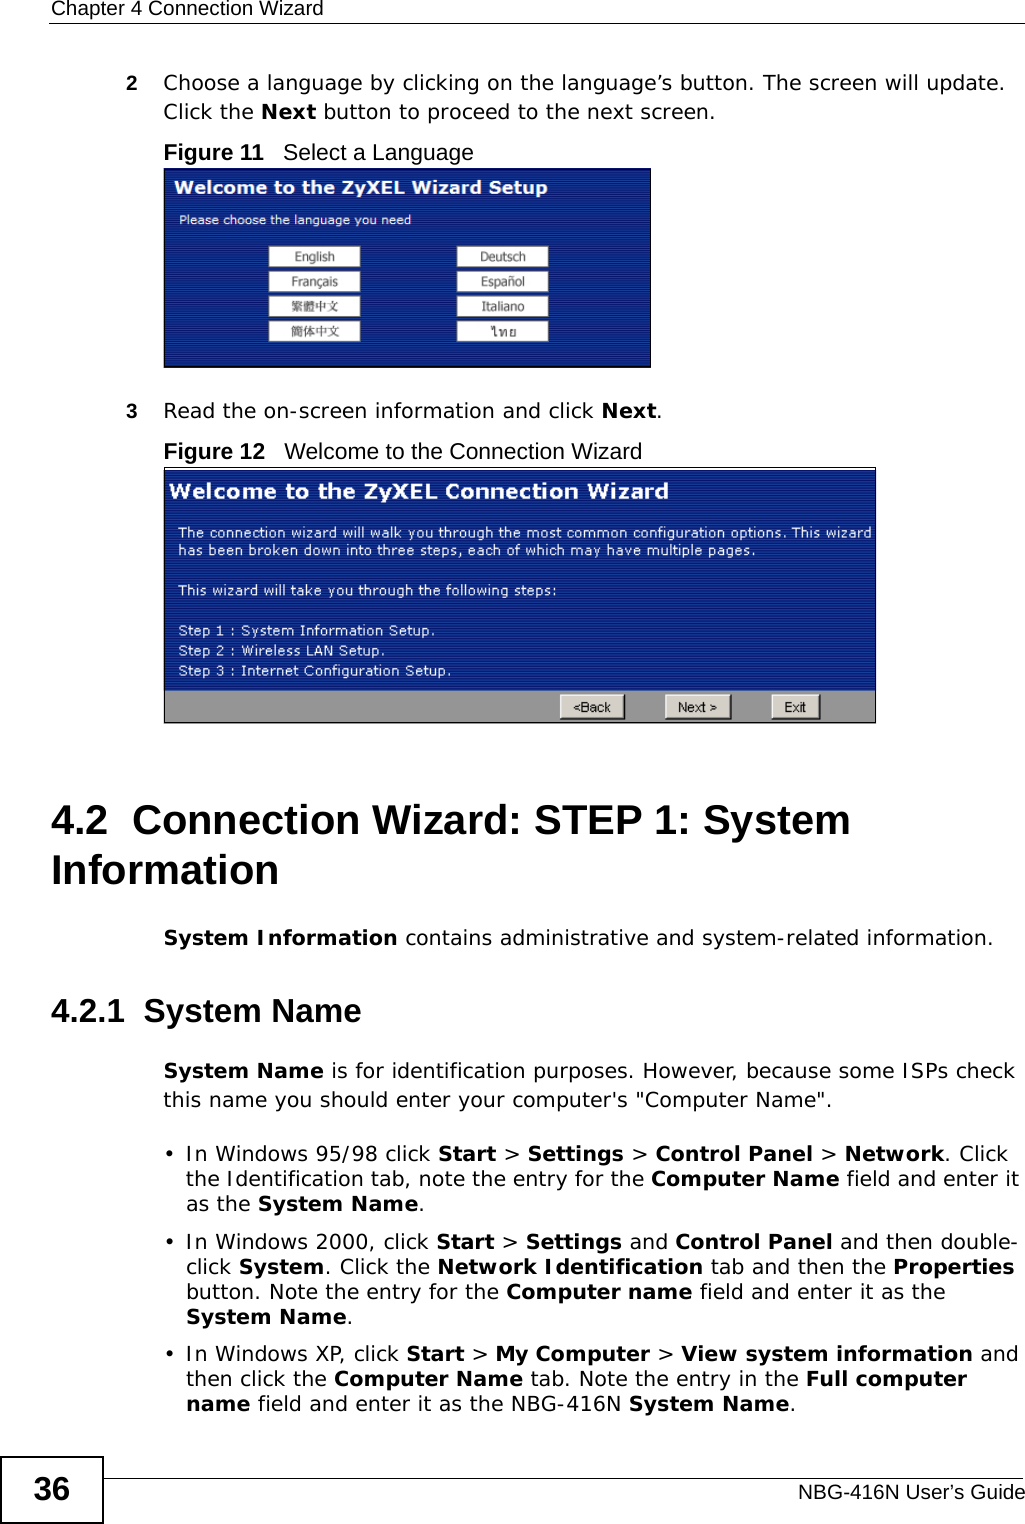 Chapter 4 Connection WizardNBG-416N User’s Guide362Choose a language by clicking on the language’s button. The screen will update. Click the Next button to proceed to the next screen.Figure 11   Select a Language3Read the on-screen information and click Next.Figure 12   Welcome to the Connection Wizard4.2  Connection Wizard: STEP 1: System InformationSystem Information contains administrative and system-related information.4.2.1  System NameSystem Name is for identification purposes. However, because some ISPs check this name you should enter your computer&apos;s &quot;Computer Name&quot;. • In Windows 95/98 click Start &gt; Settings &gt; Control Panel &gt; Network. Click the Identification tab, note the entry for the Computer Name field and enter it as the System Name.• In Windows 2000, click Start &gt; Settings and Control Panel and then double-click System. Click the Network Identification tab and then the Properties button. Note the entry for the Computer name field and enter it as the System Name.• In Windows XP, click Start &gt; My Computer &gt; View system information and then click the Computer Name tab. Note the entry in the Full computer name field and enter it as the NBG-416N System Name.